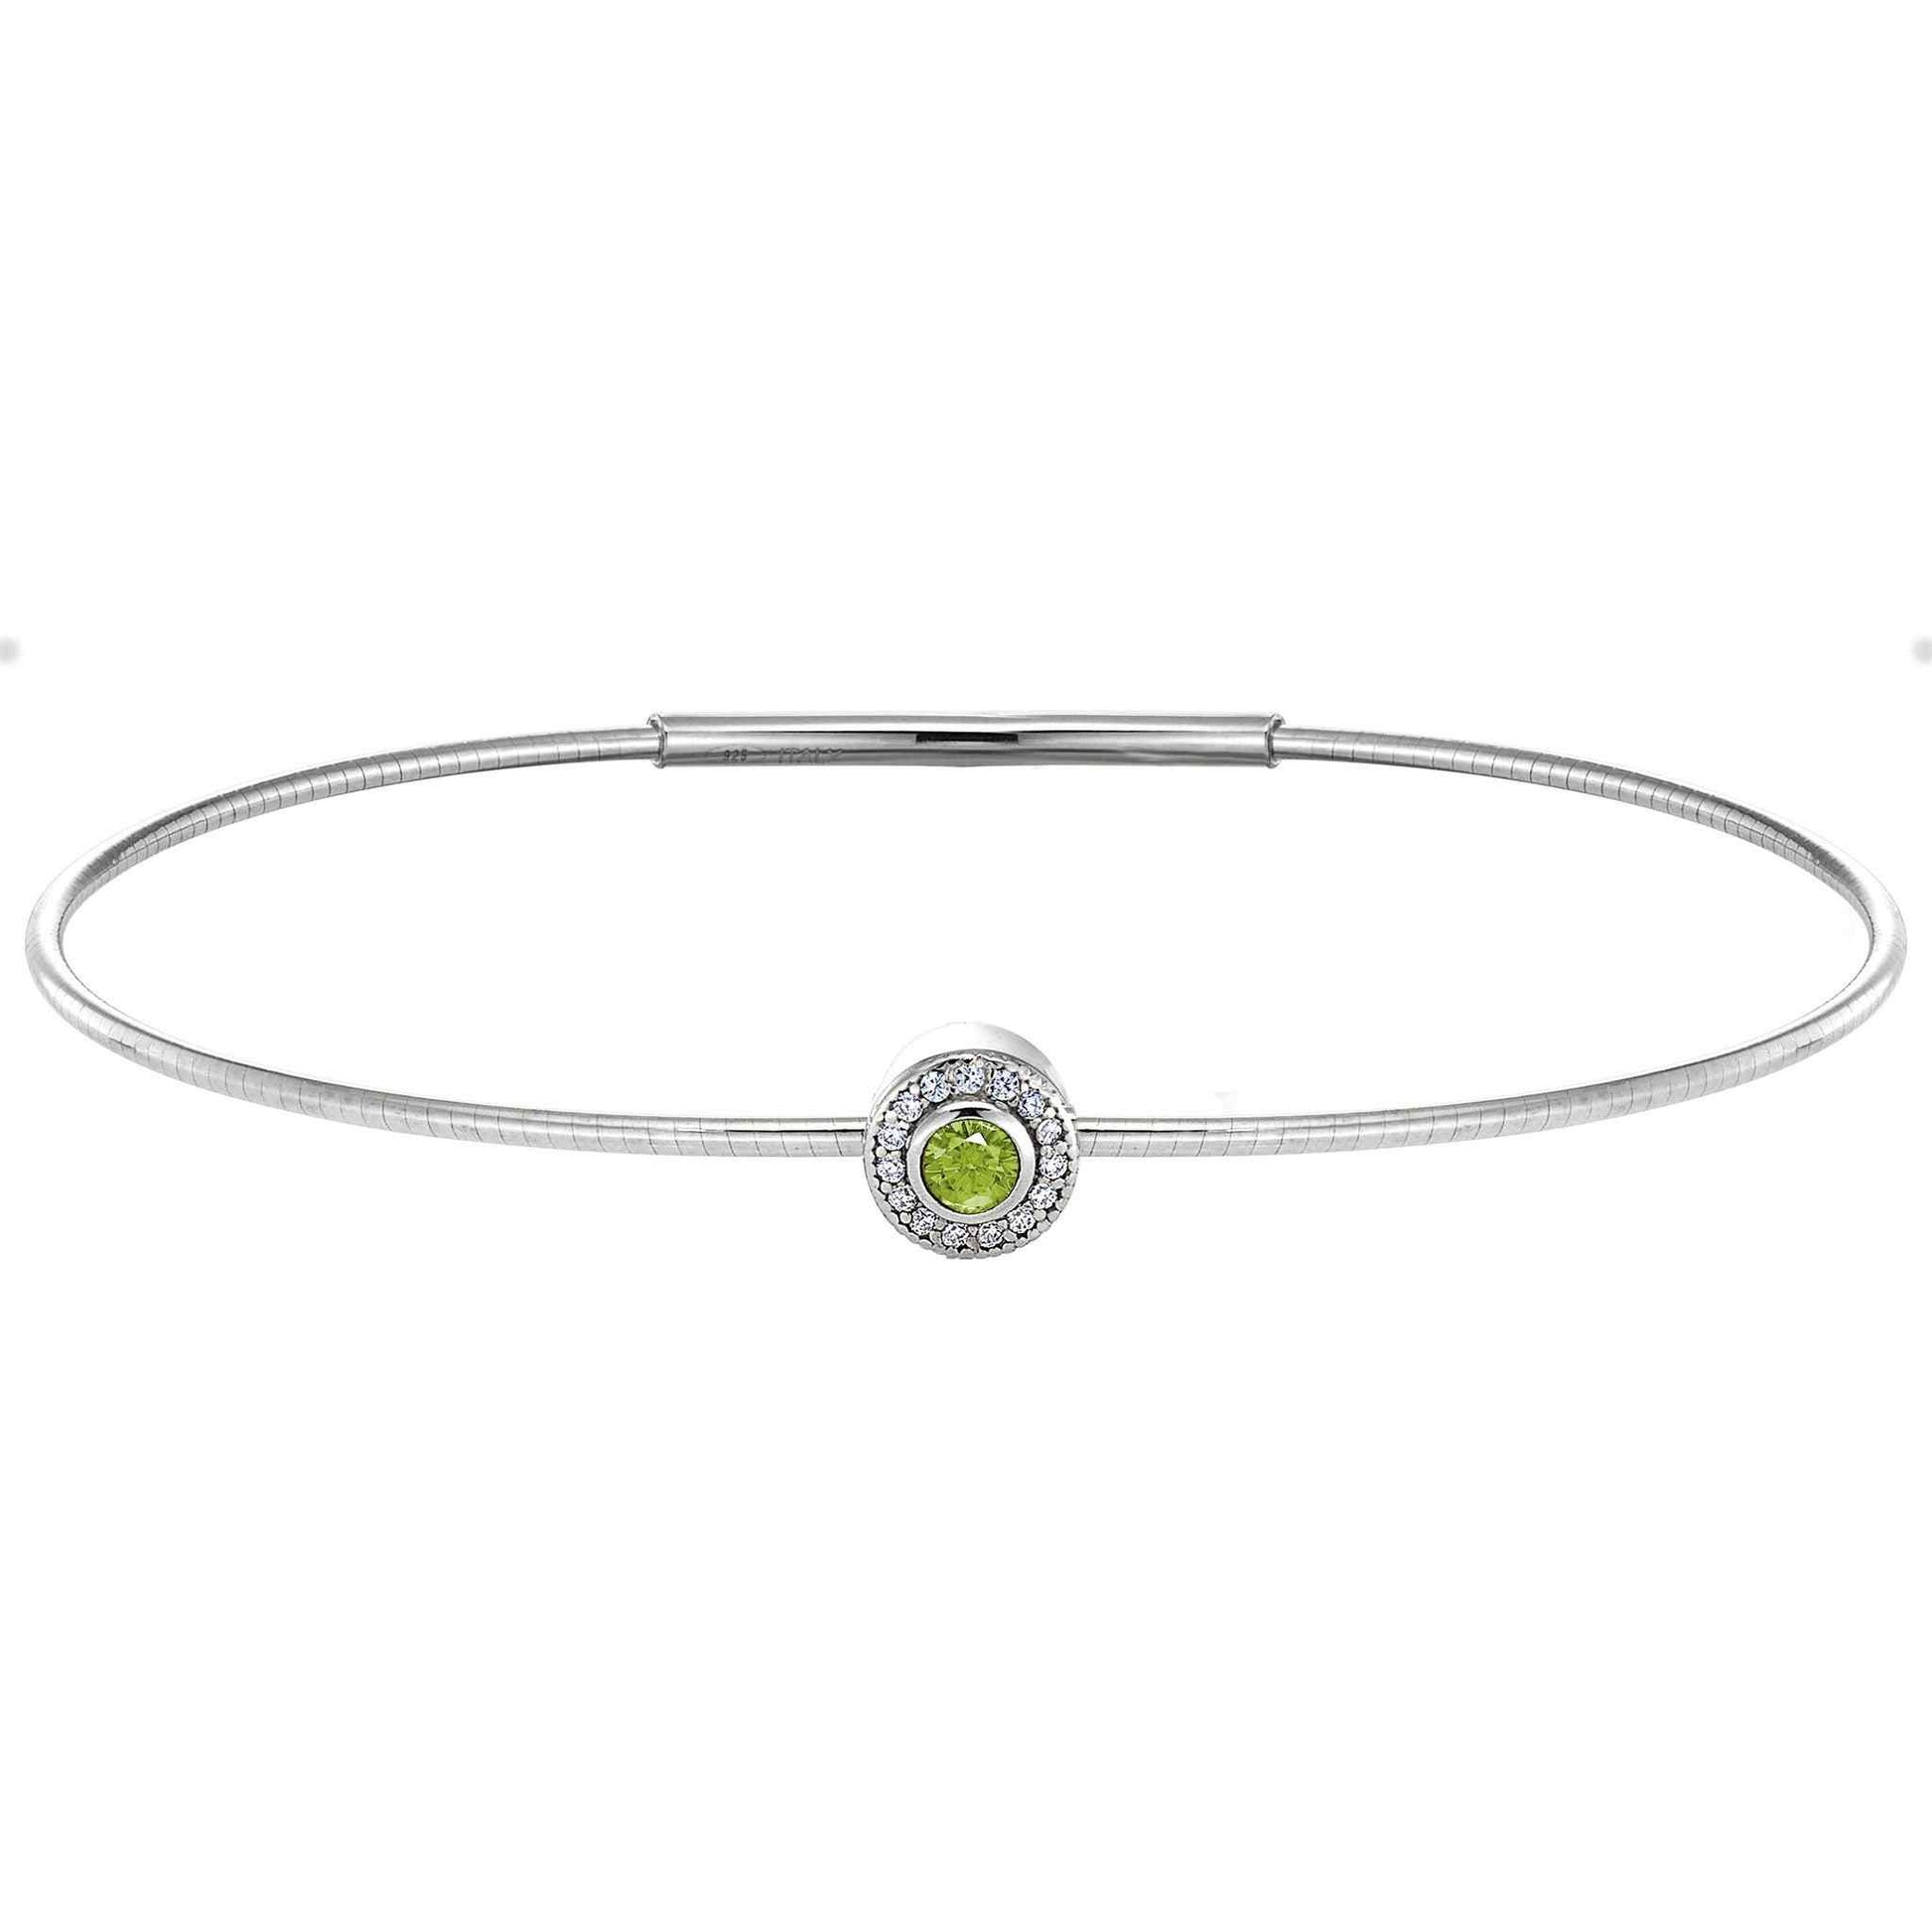 A simulated diamond halo-style birthstone bracelet displayed on a neutral white background.